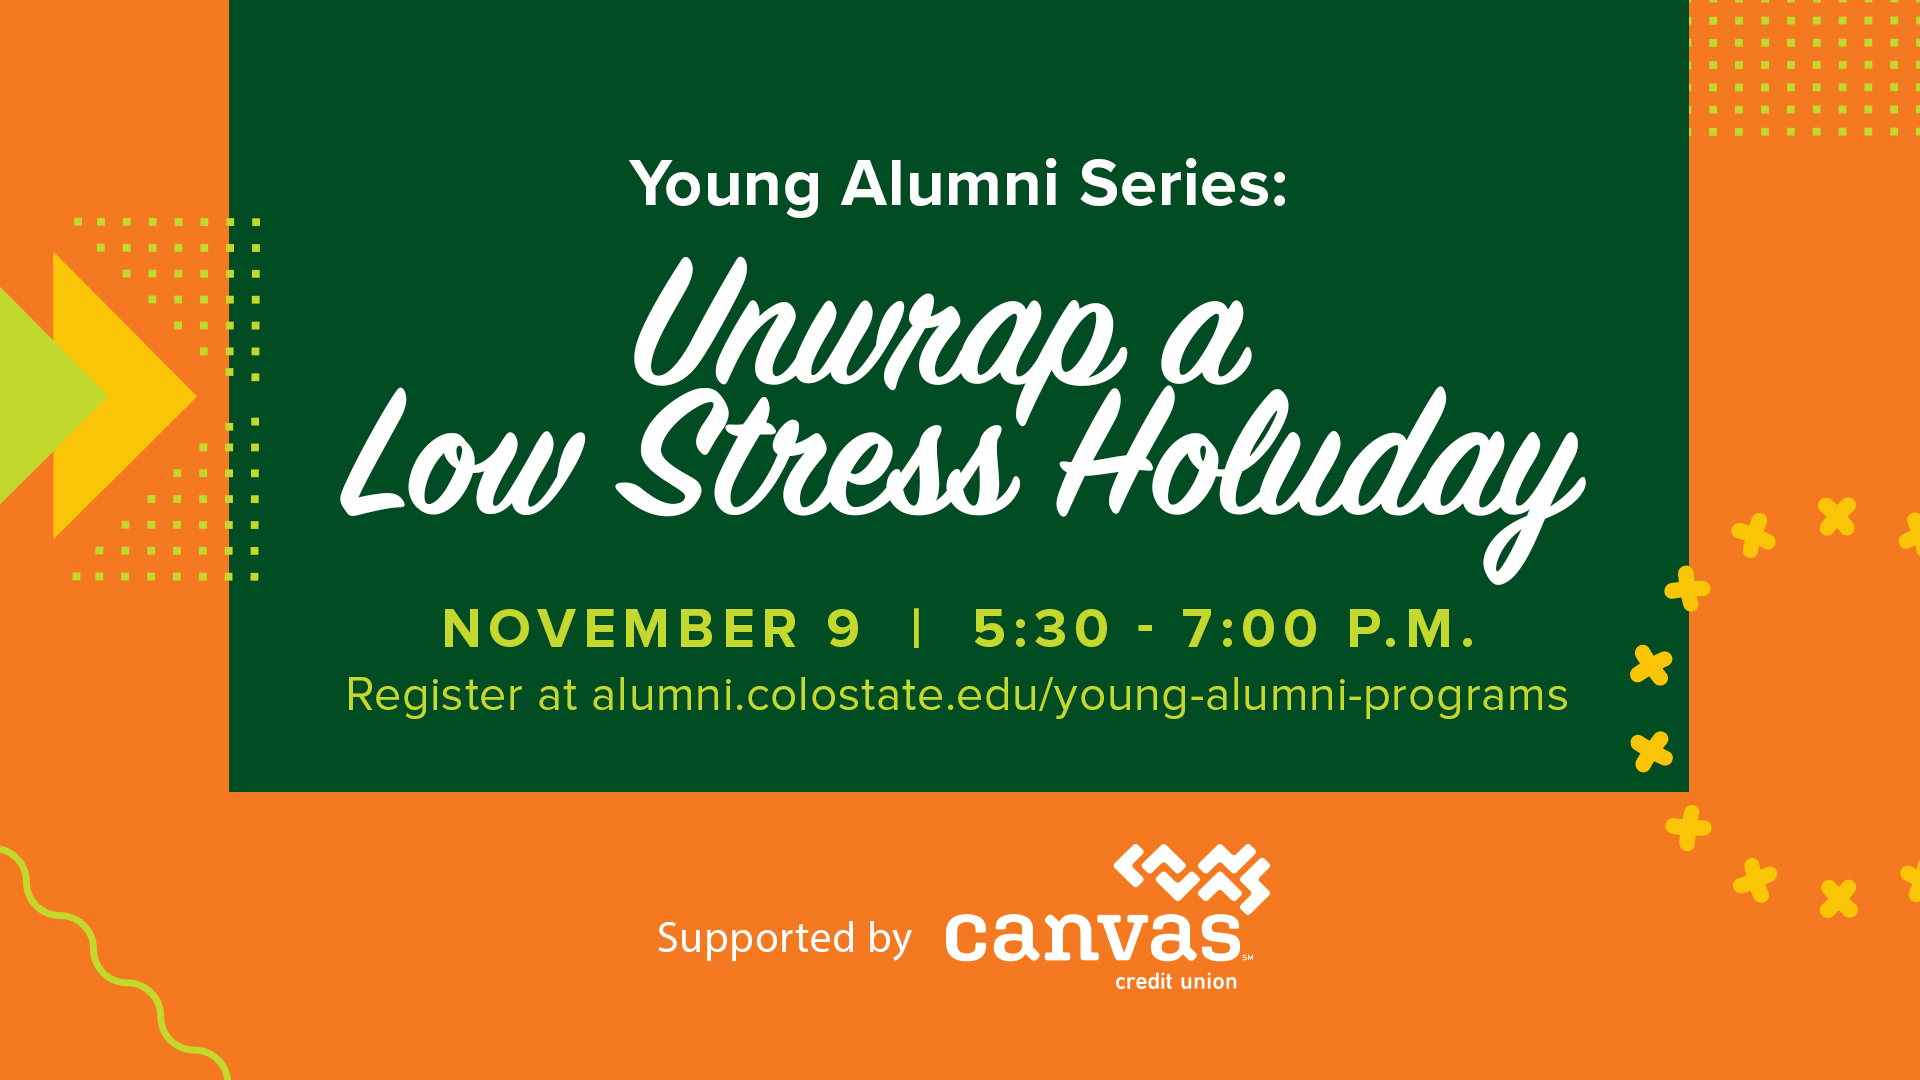 Image for Young Alumni Series: Unwrap a Low Stress Holiday webinar